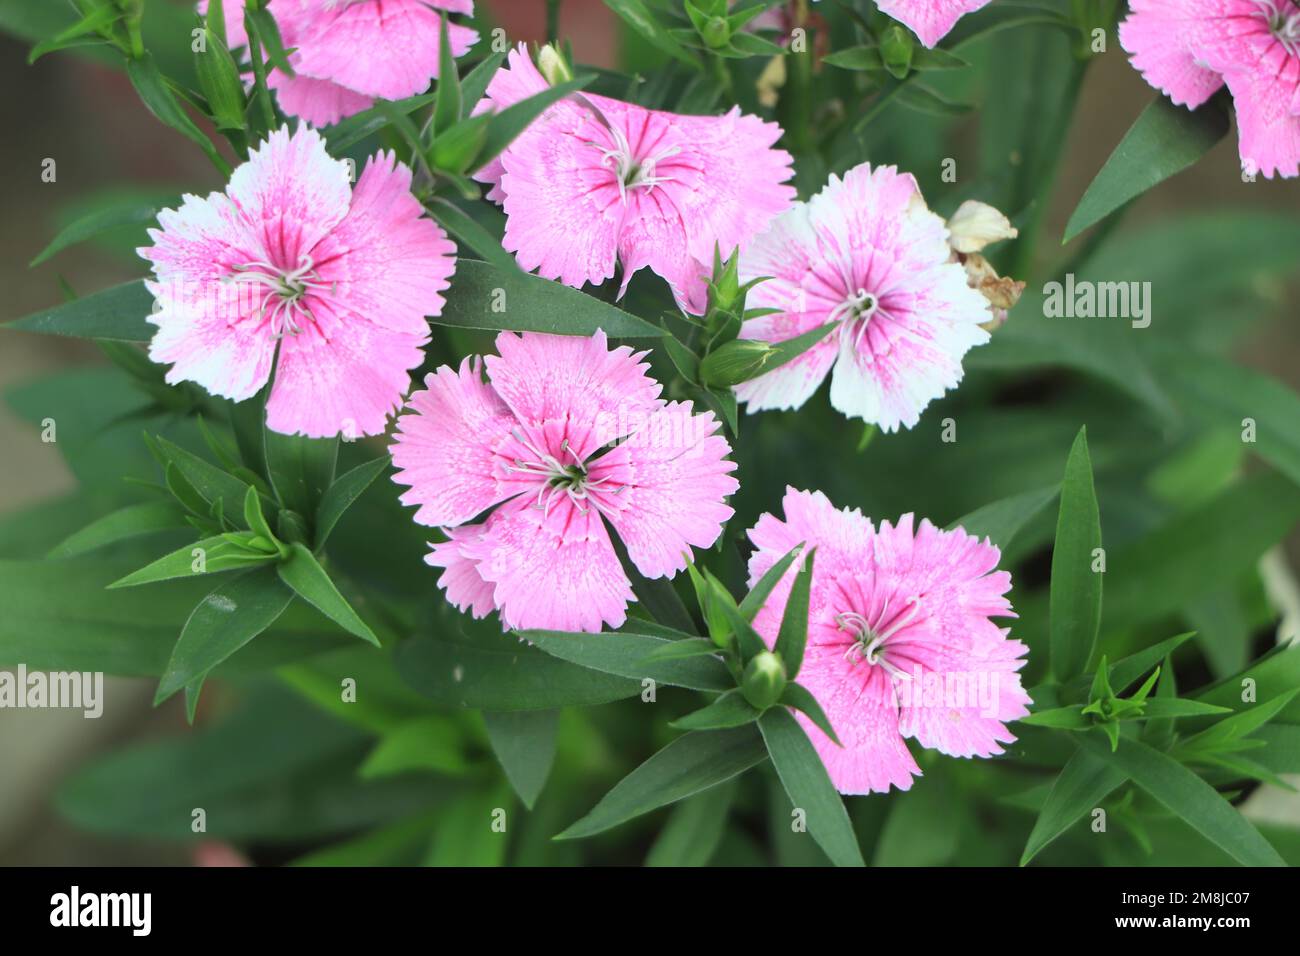 Dianthus gratianopolitanus or cheddar pink many pink flowers close up Stock Photo